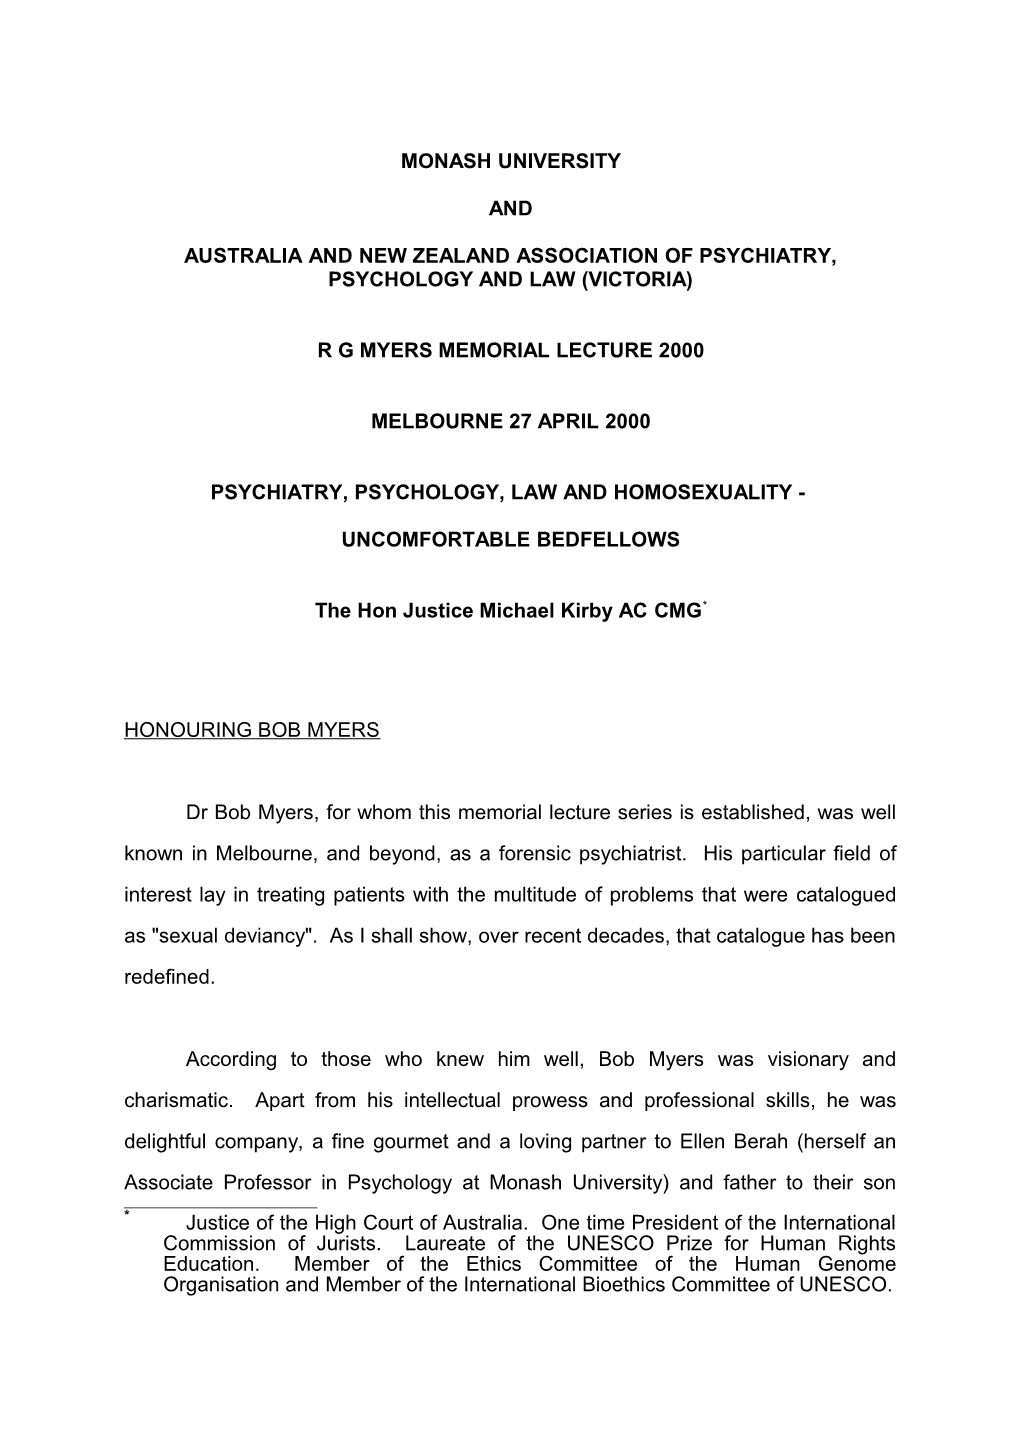 Australia and New Zealand Association of Psychiatry, Psychology and Law (Victoria)